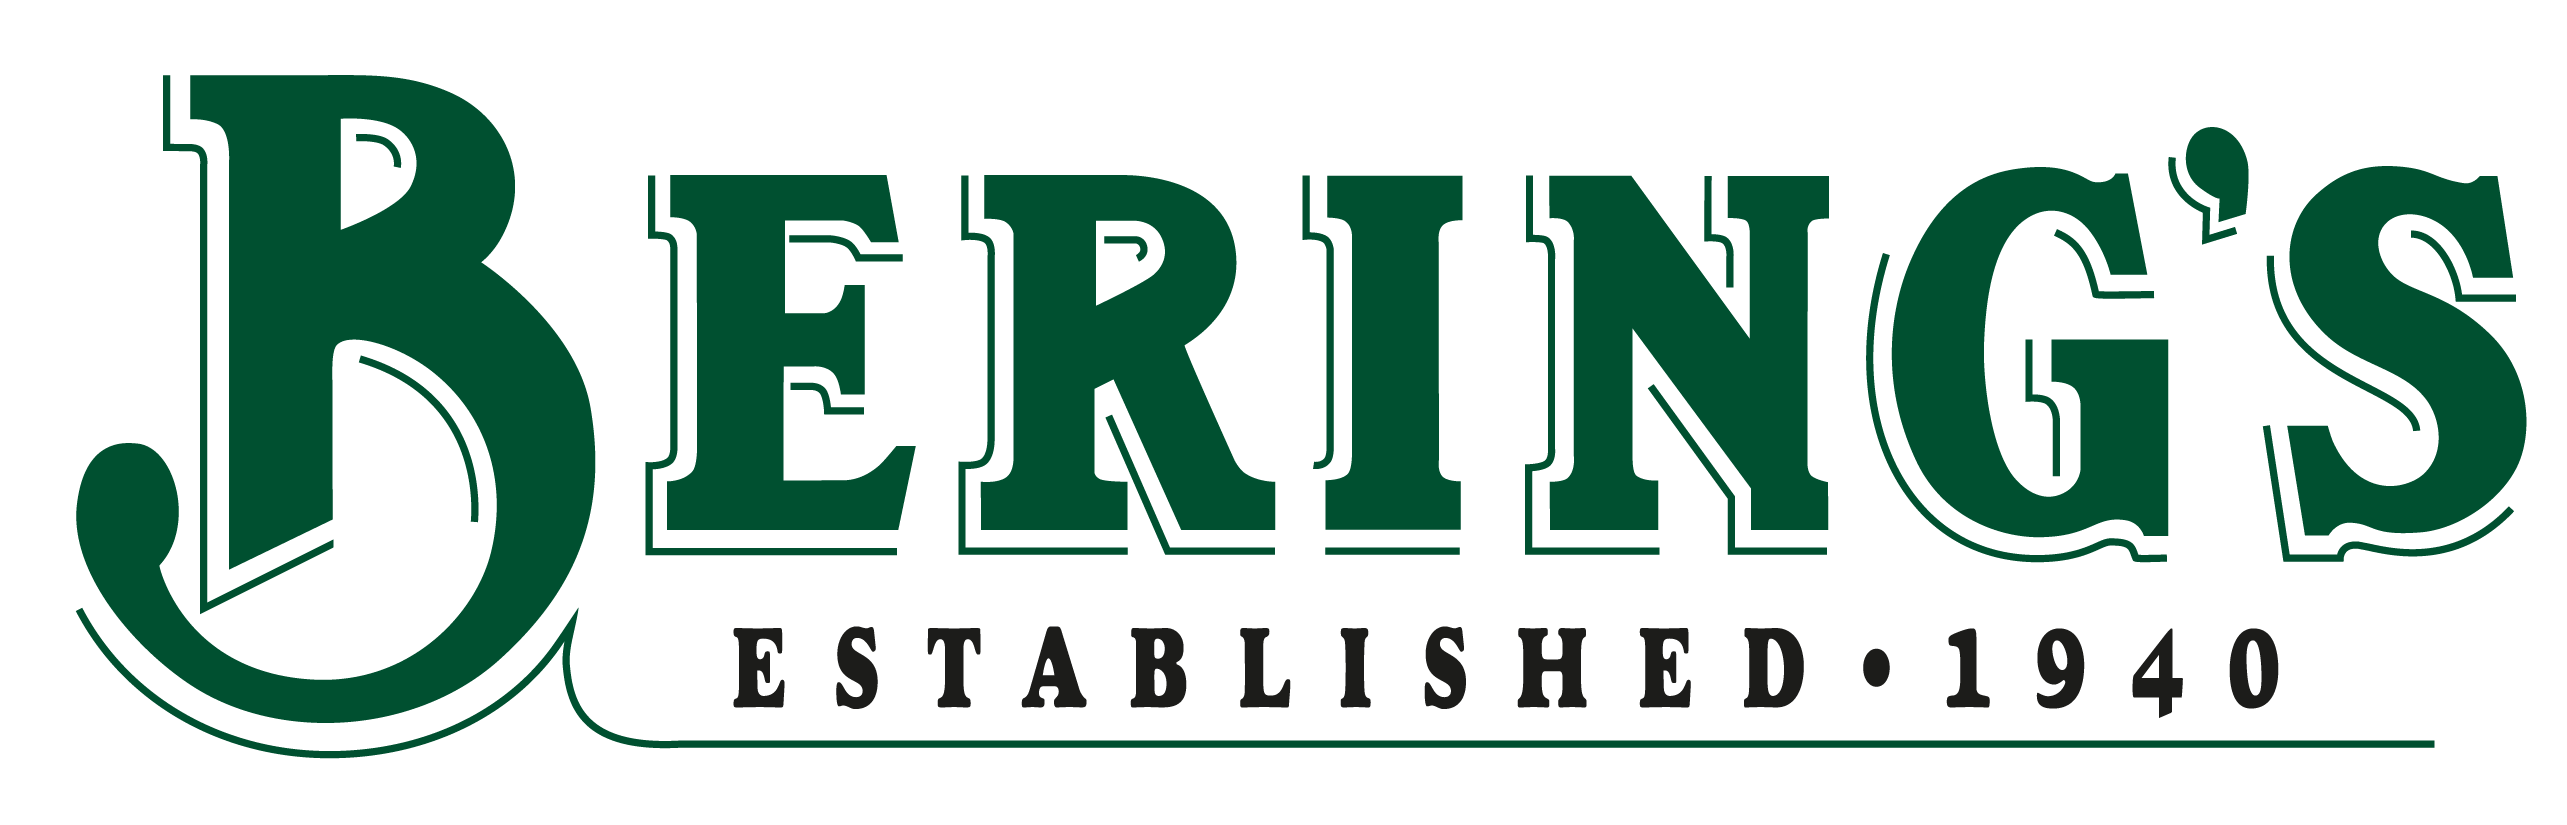 Bering's 3435 Classic Green and Black Logo